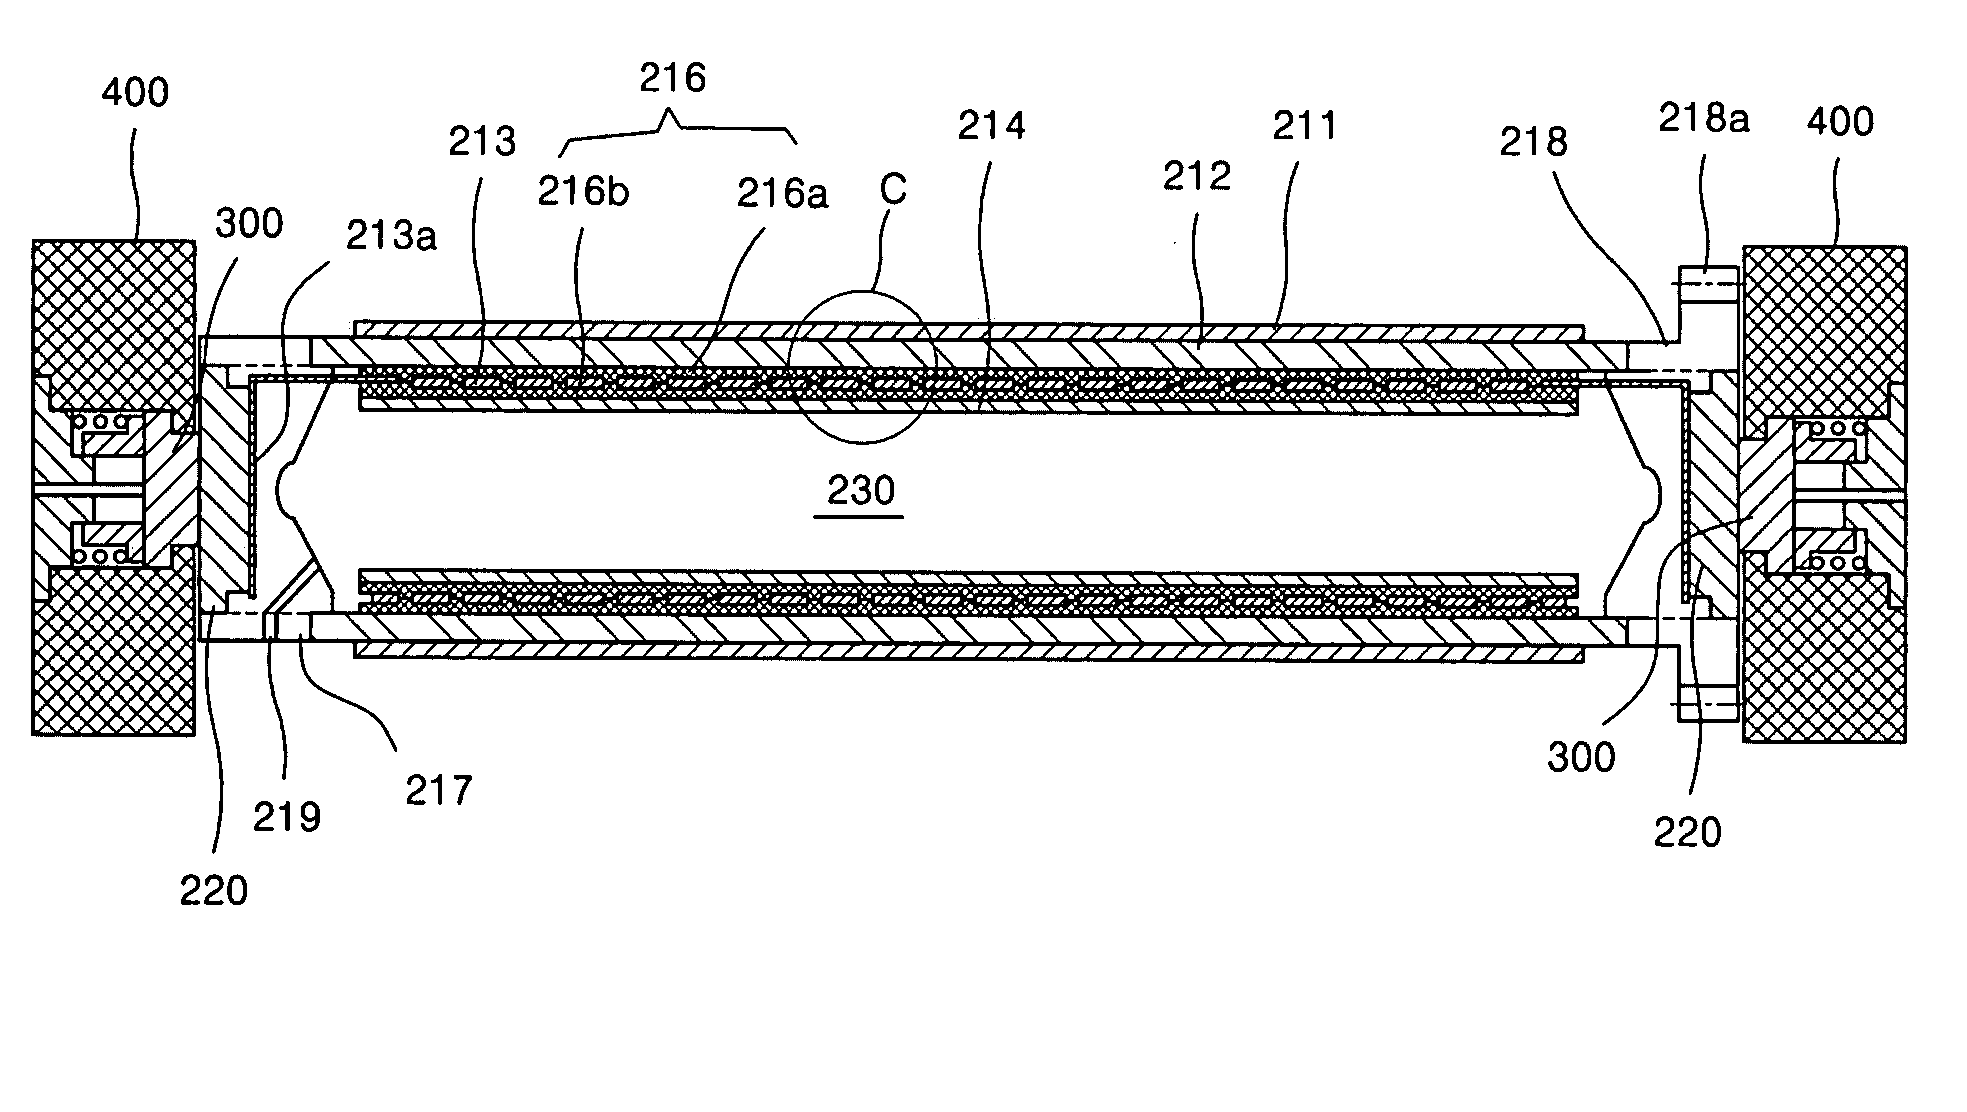 Fusing roller apparatus of electro-photographic image forming apparatus, and a process of manufactuing a fusing roller apparatus